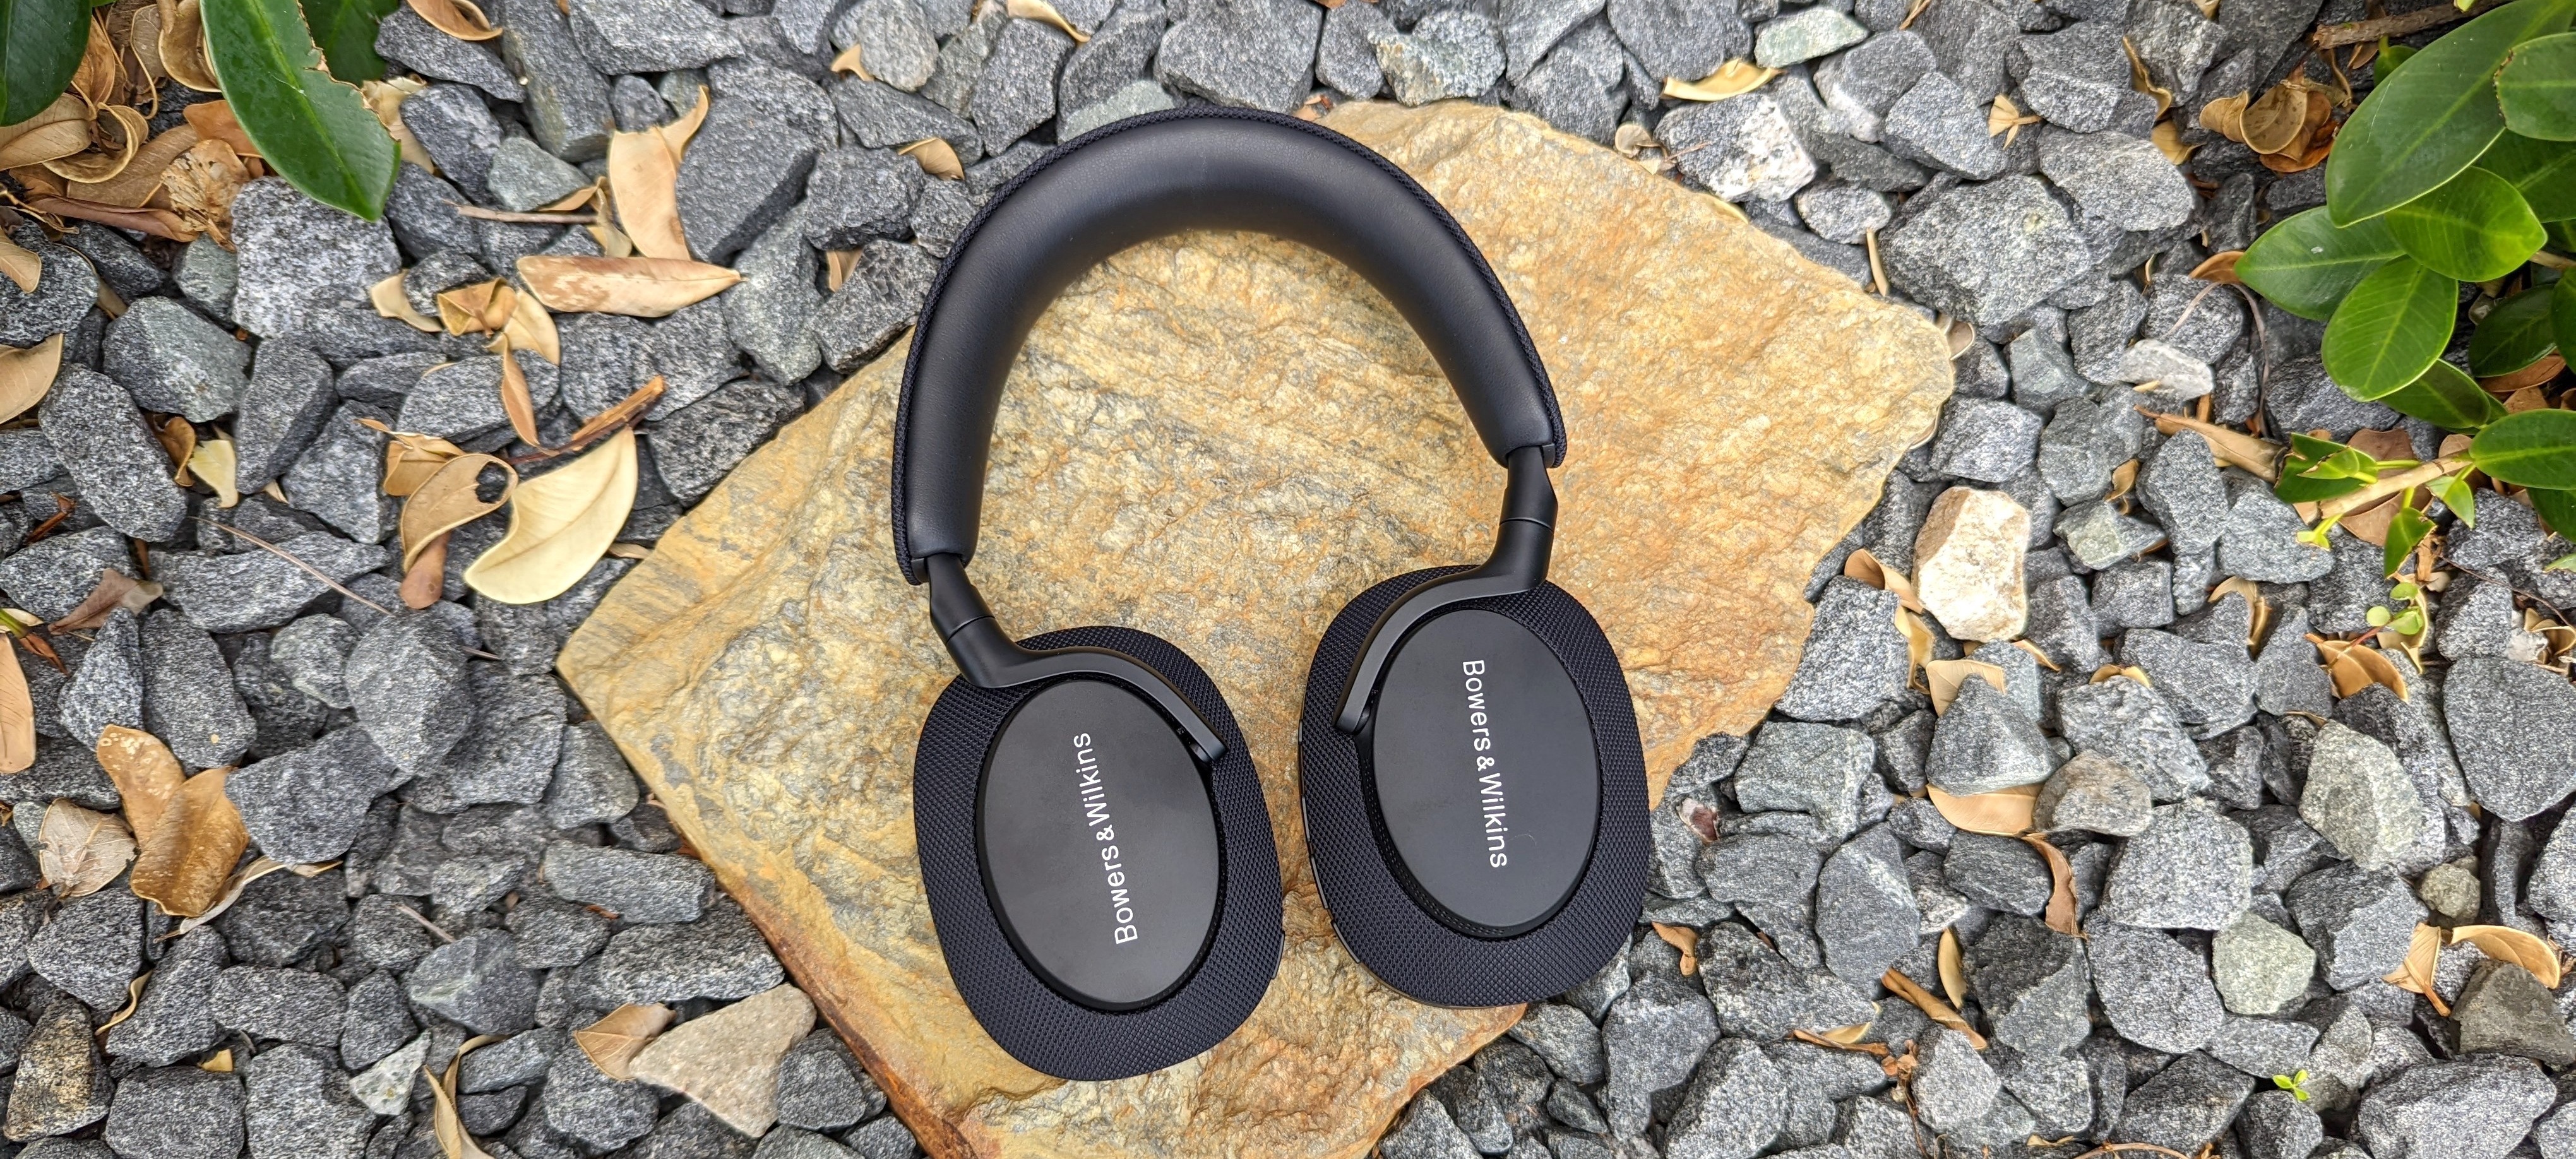 Bowers & Wilkins Px7 s2 in Blue Impressions  Headphone Reviews and  Discussion 